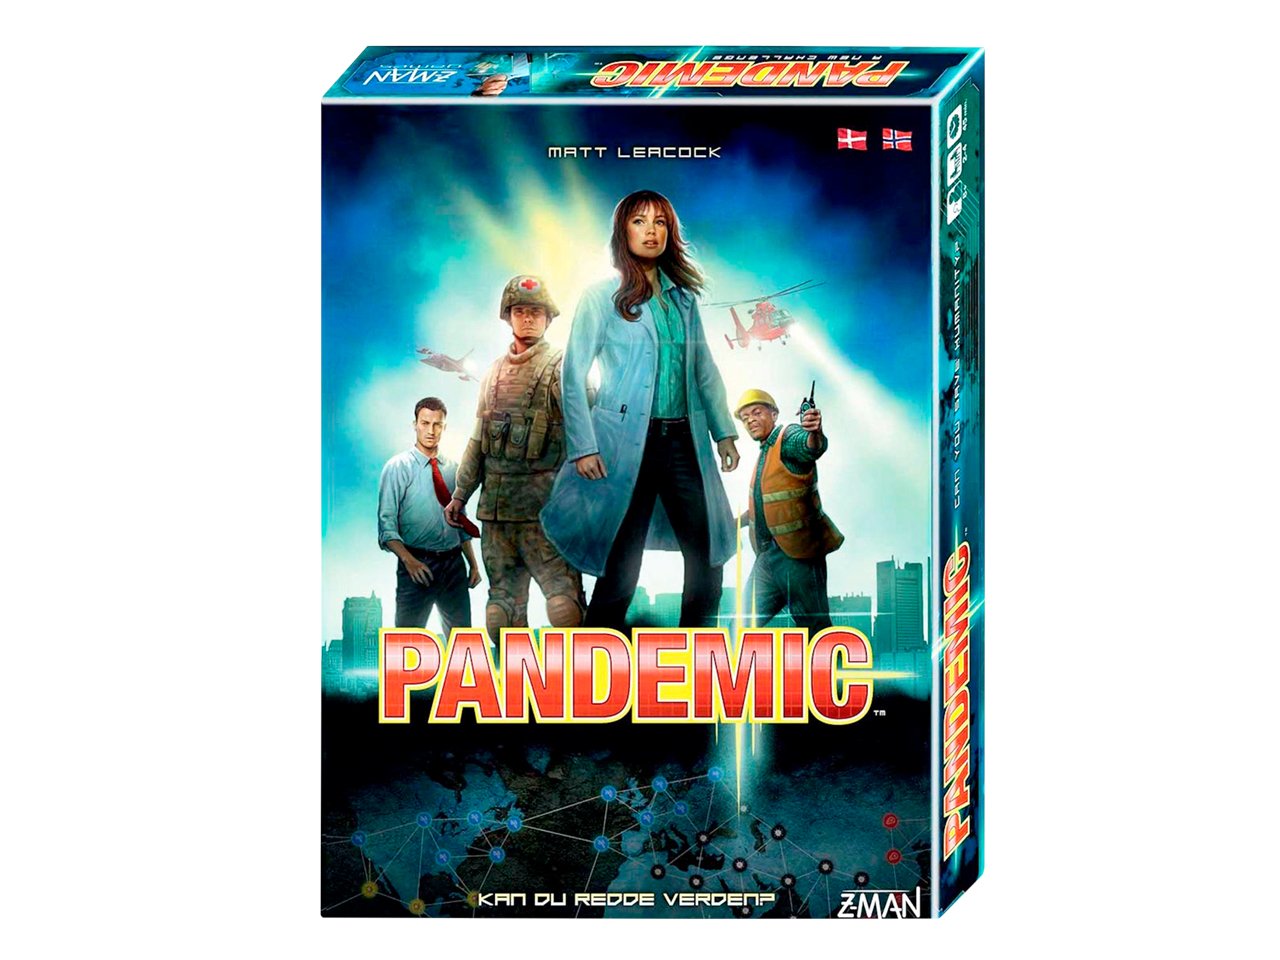 The box of Pandemic